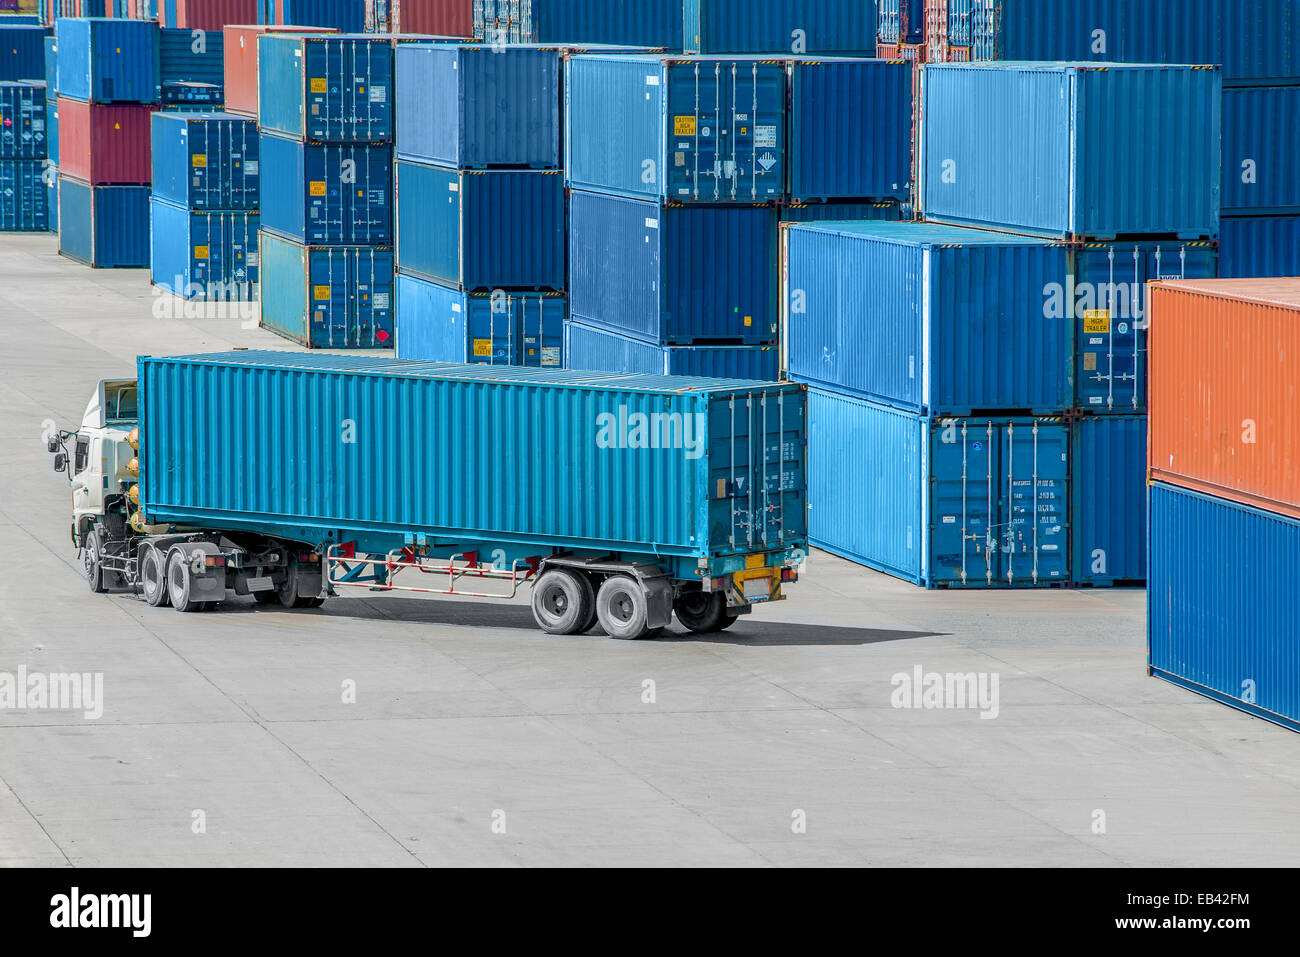 Truck in container depot Stock Photo